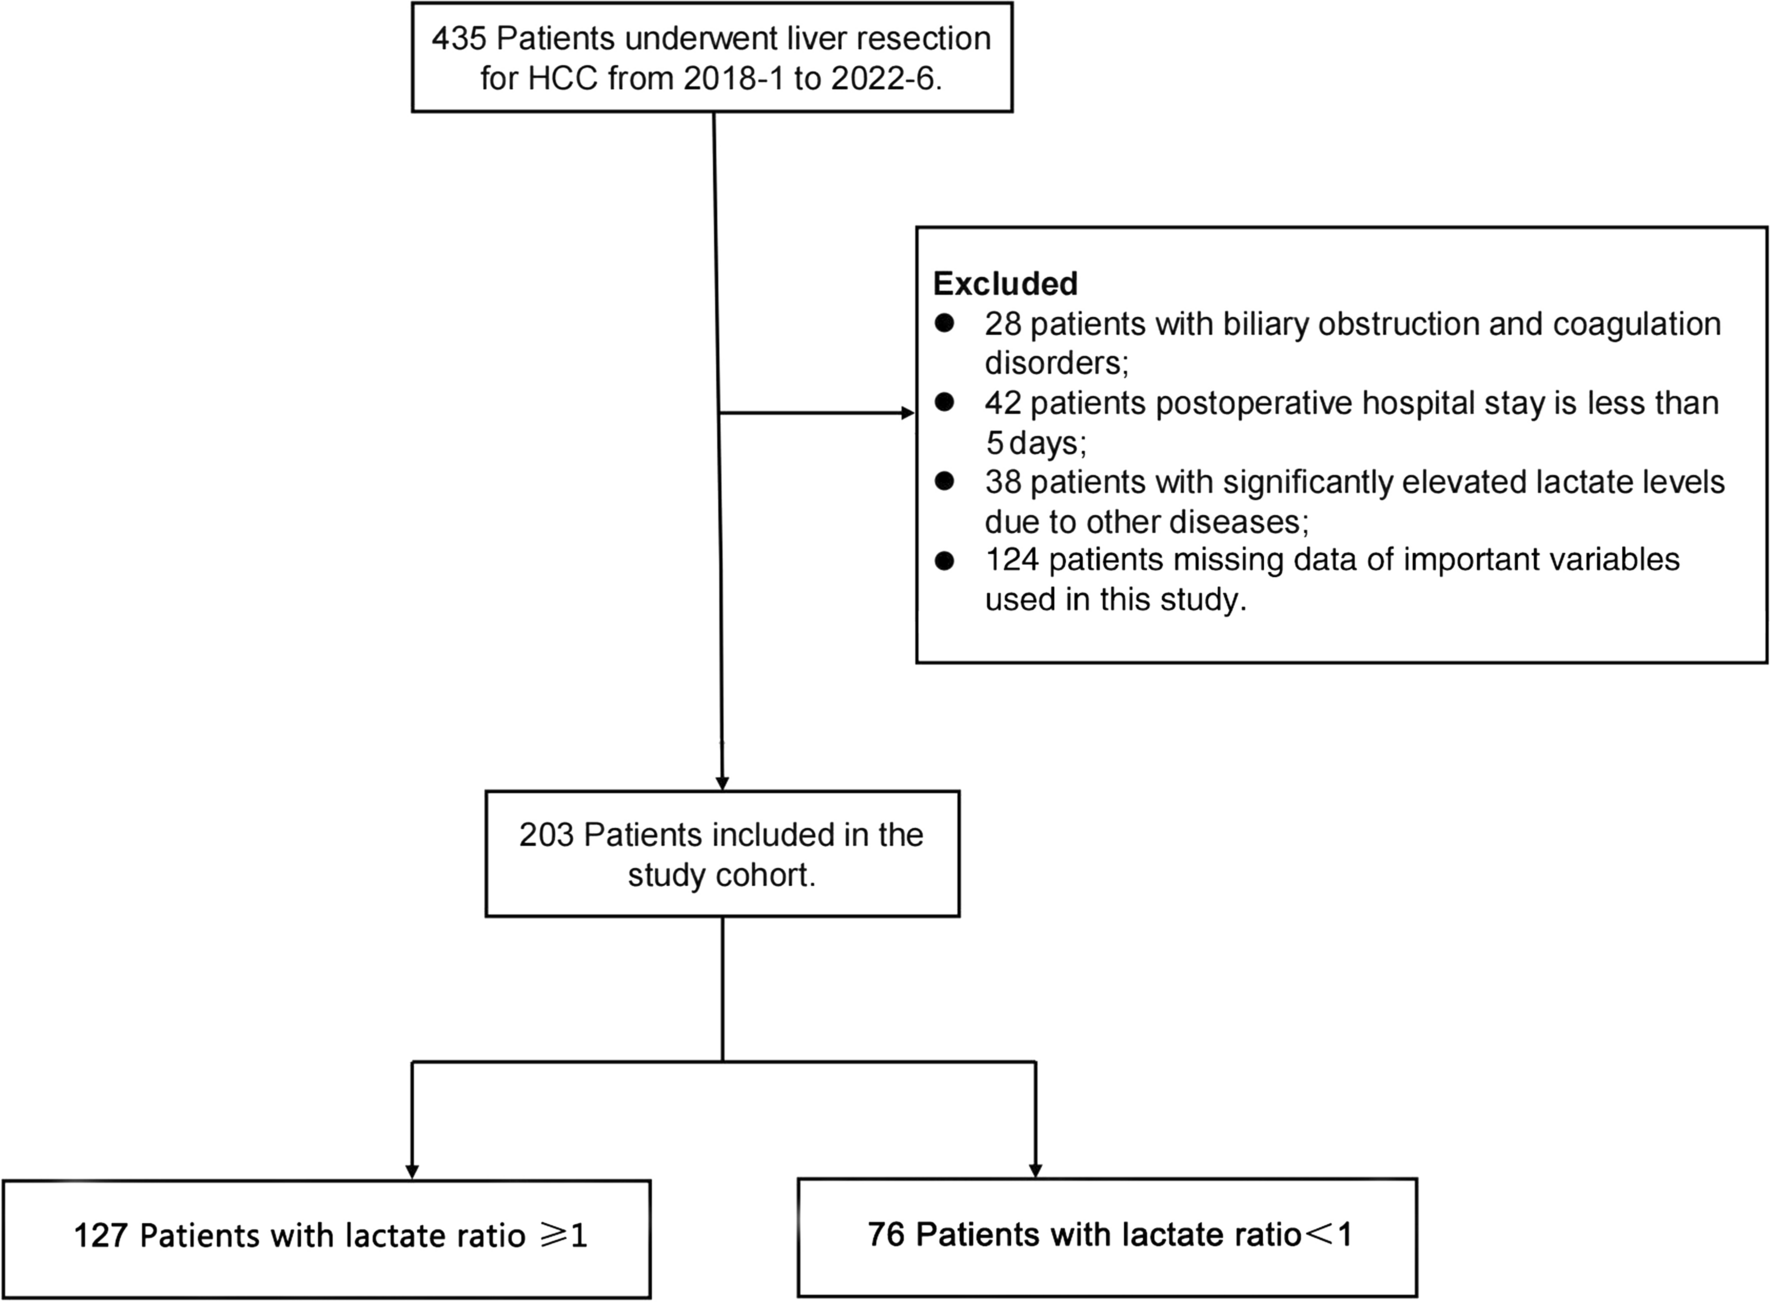 Effect of early peri-operative arterial lactate concentration level ratios on post-hepatectomy liver failure